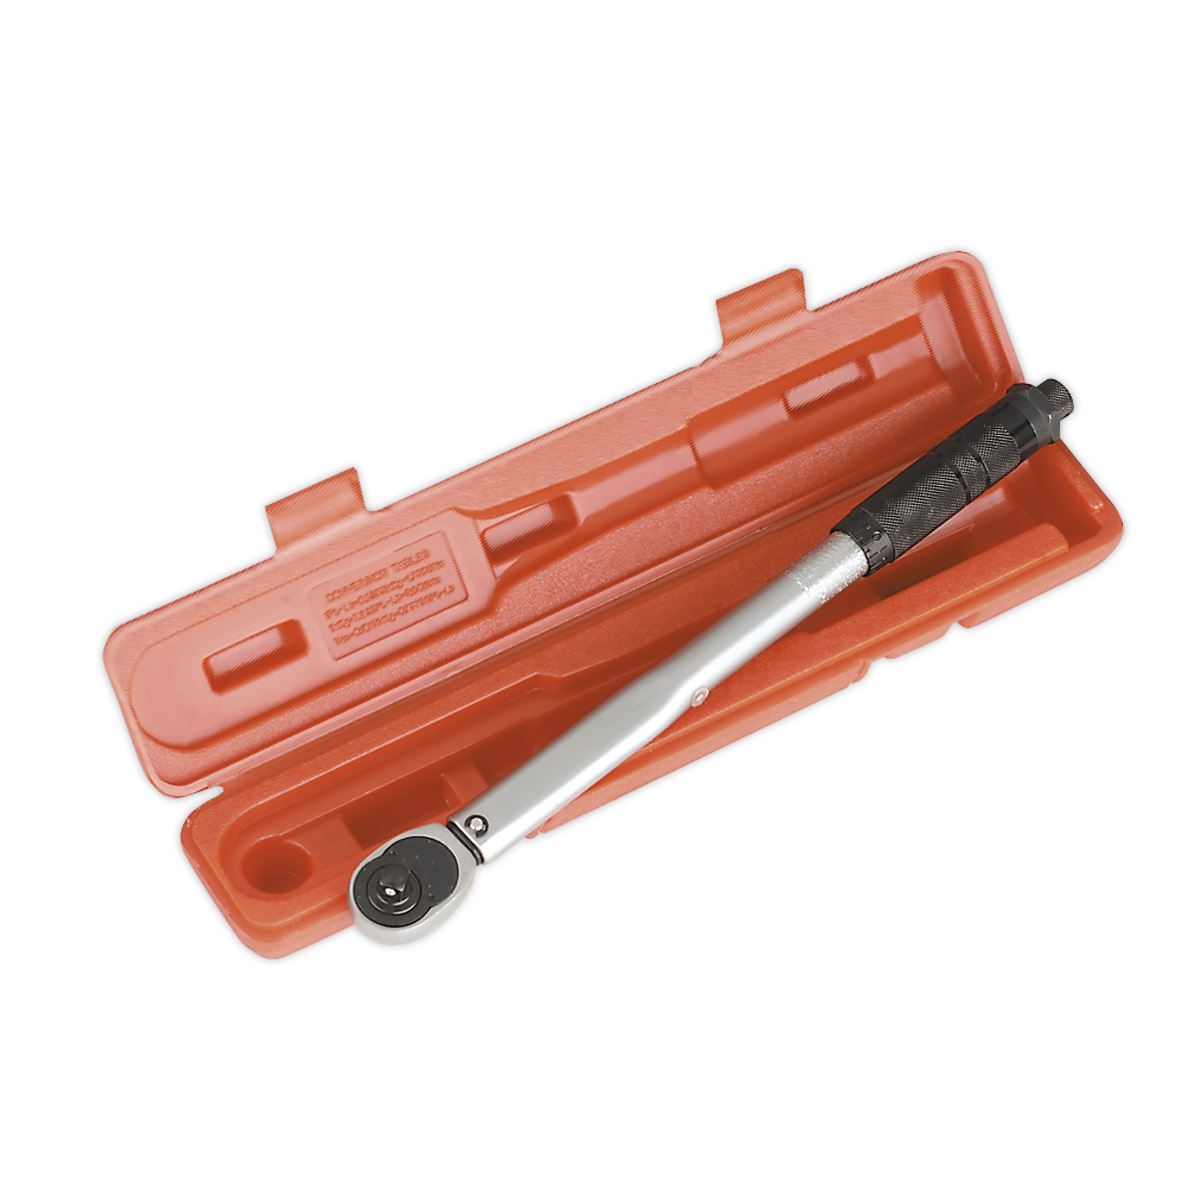 Sealey Premier Torque Wrench Micrometer Style 3/8"Sq Drive 7-112Nm(5-83lb.ft) - Calibrated